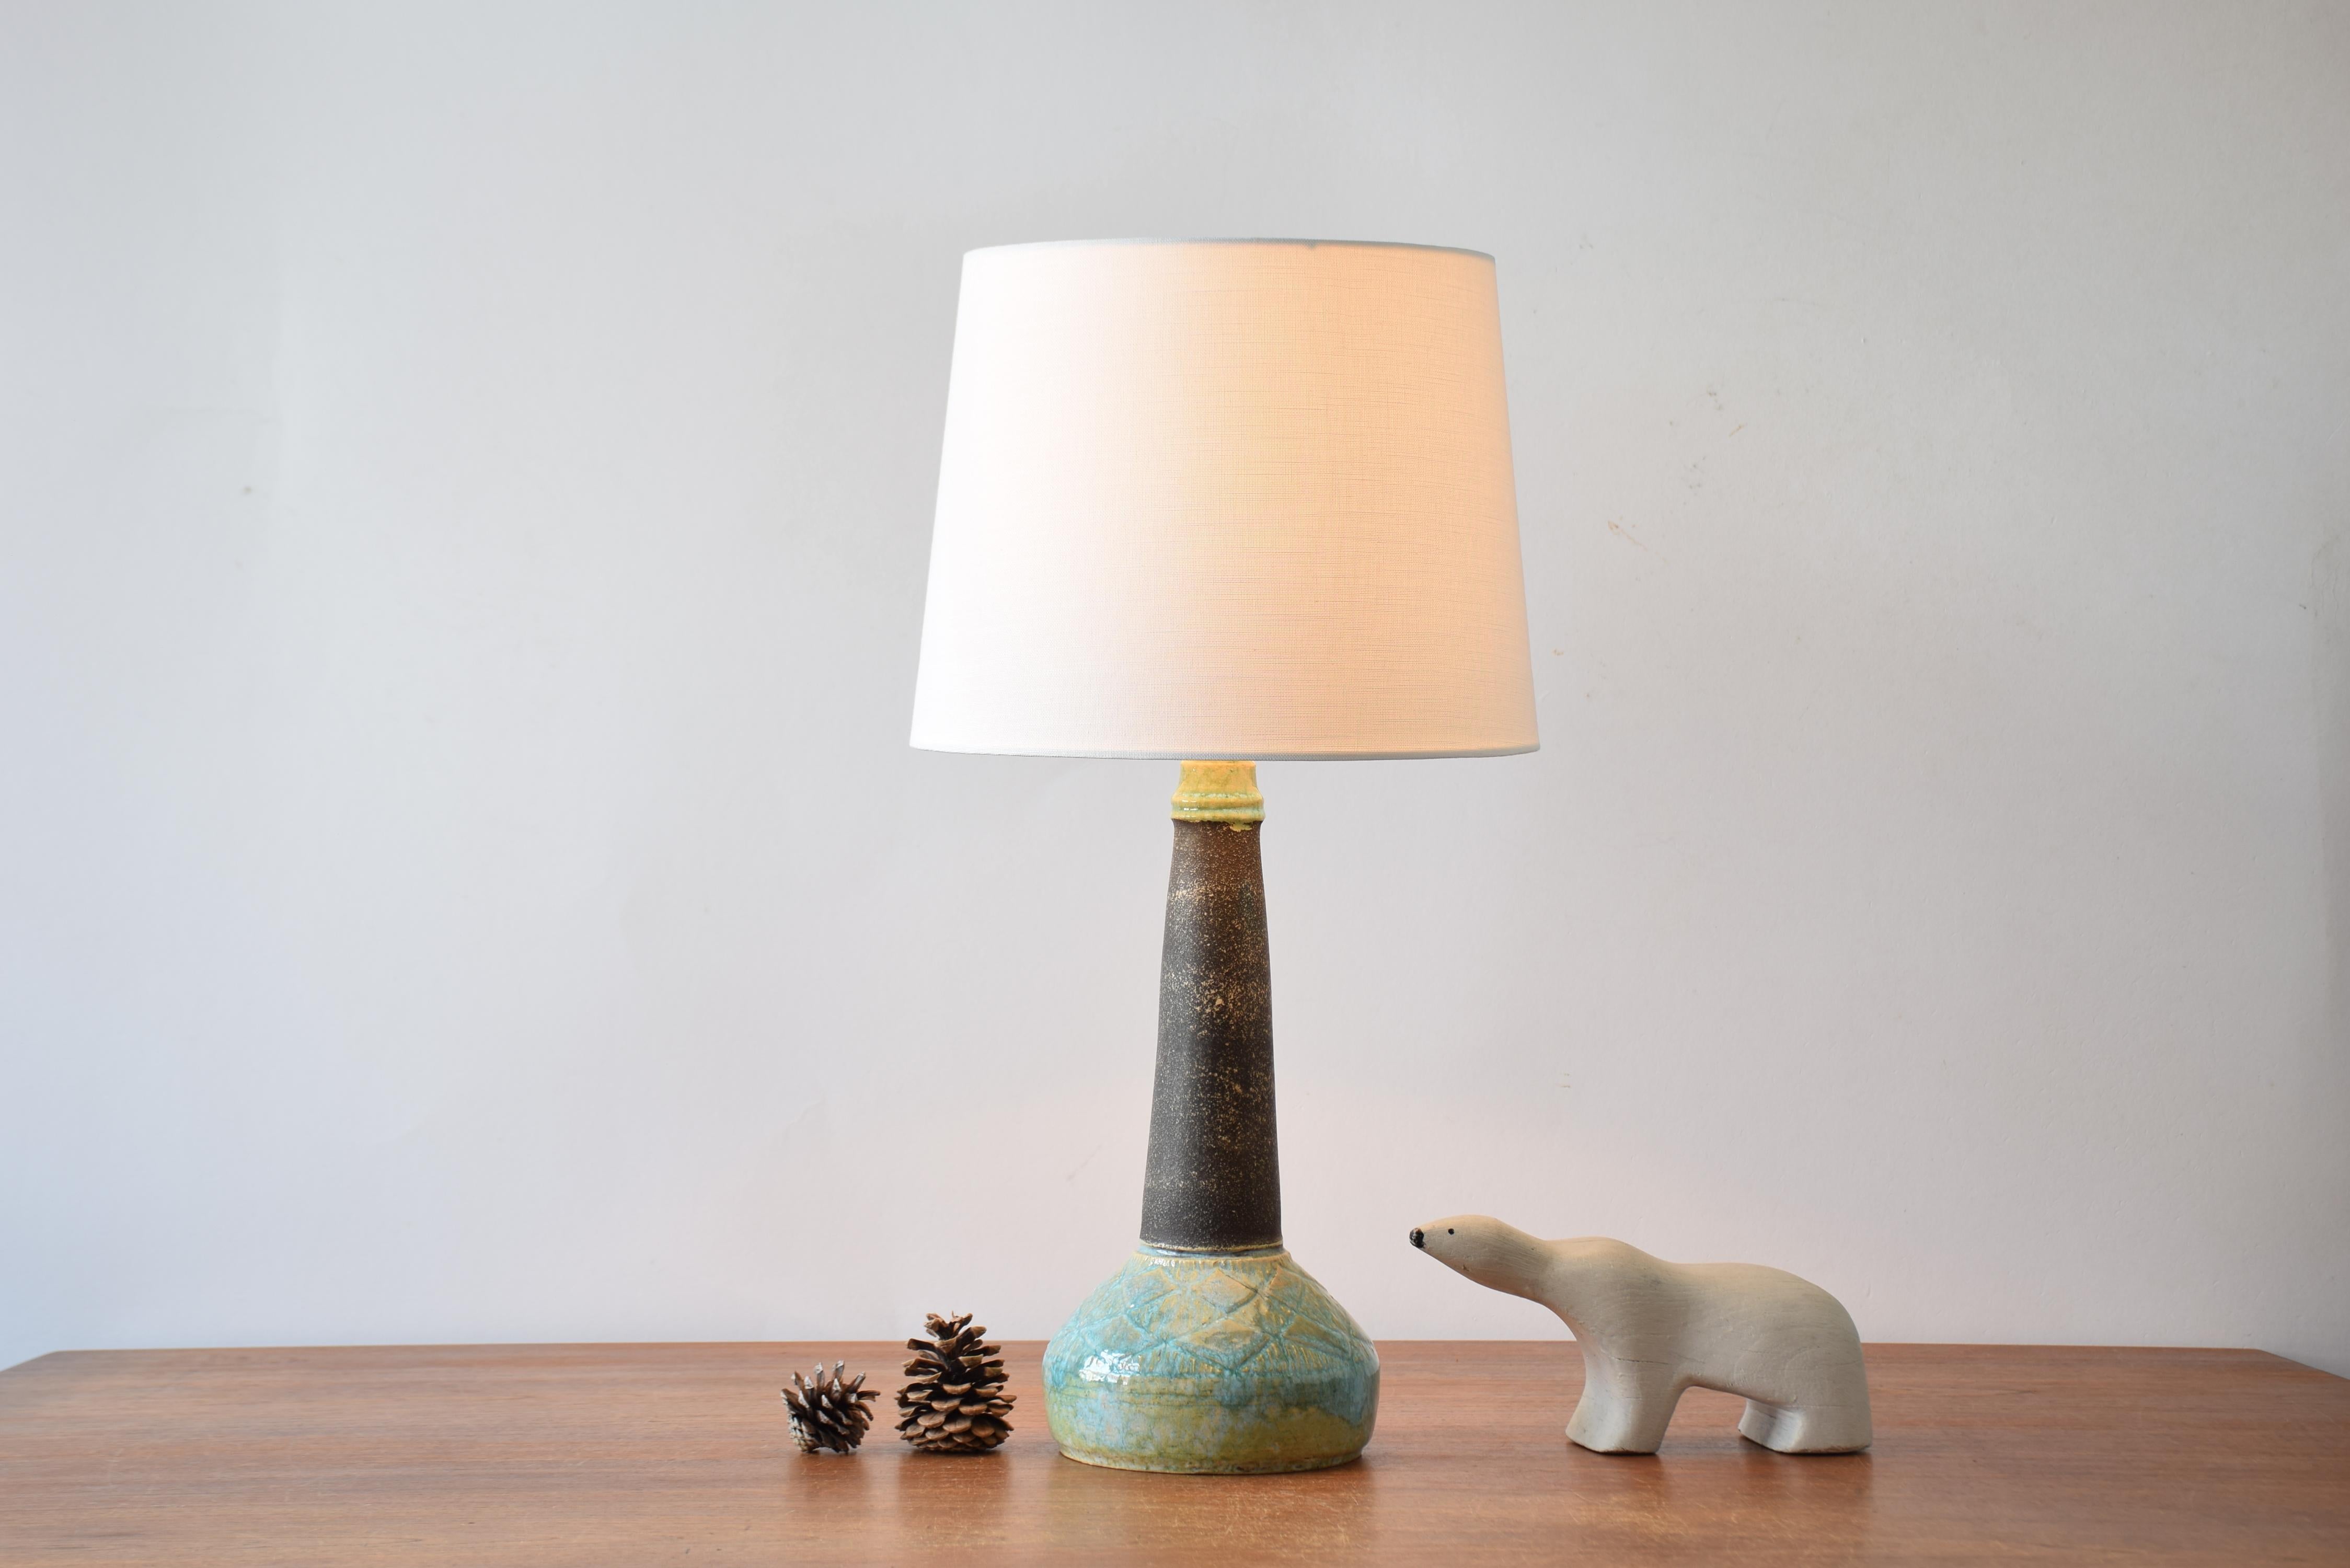 Mid-century Danish table lamp by Fridtjof Sejersen for Sejer made ca 1960s to 1970s. It´s made in his own studio workshop in Nr. Aaby on the Danish island Funen which he ran from 1941 to 1978.

The lamp has a great contrast between the matte brown